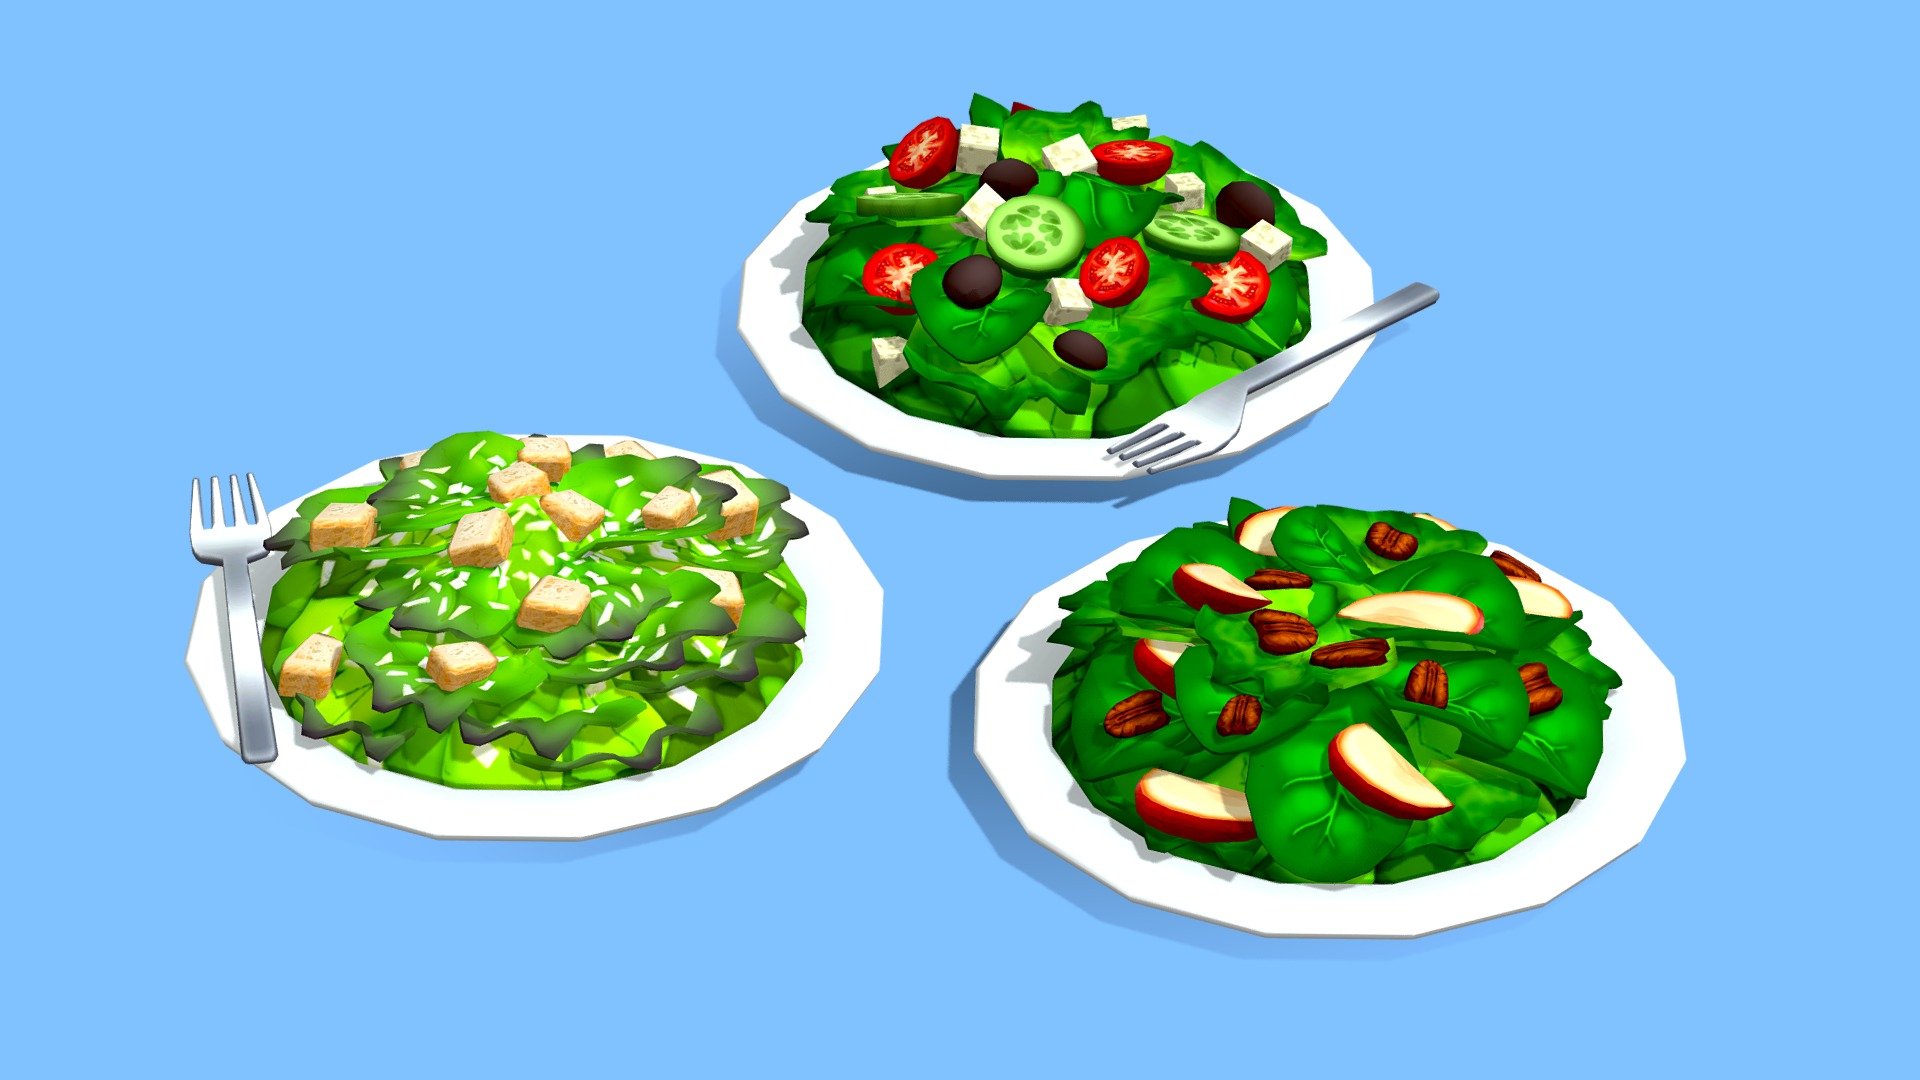 Three healthy, low-poly salads for your next cafe!




Greek salad, apple/pecan and caesar salad

Plates and fork included!

This asset uses a single 1024x1024 diffuse texture map and can be used both lit and unlit - perfect for mobile!

Modeled in Maya and painted in Photoshop.

While you’re here make sure to check out my other assets! Every asset is modeled and painted in the same style so your game or project will maintain a cohesive and unique style with a wide variety of assets to choose from! - Salads - Buy Royalty Free 3D model by Megan Alcock (@citystreetlight) 3d model